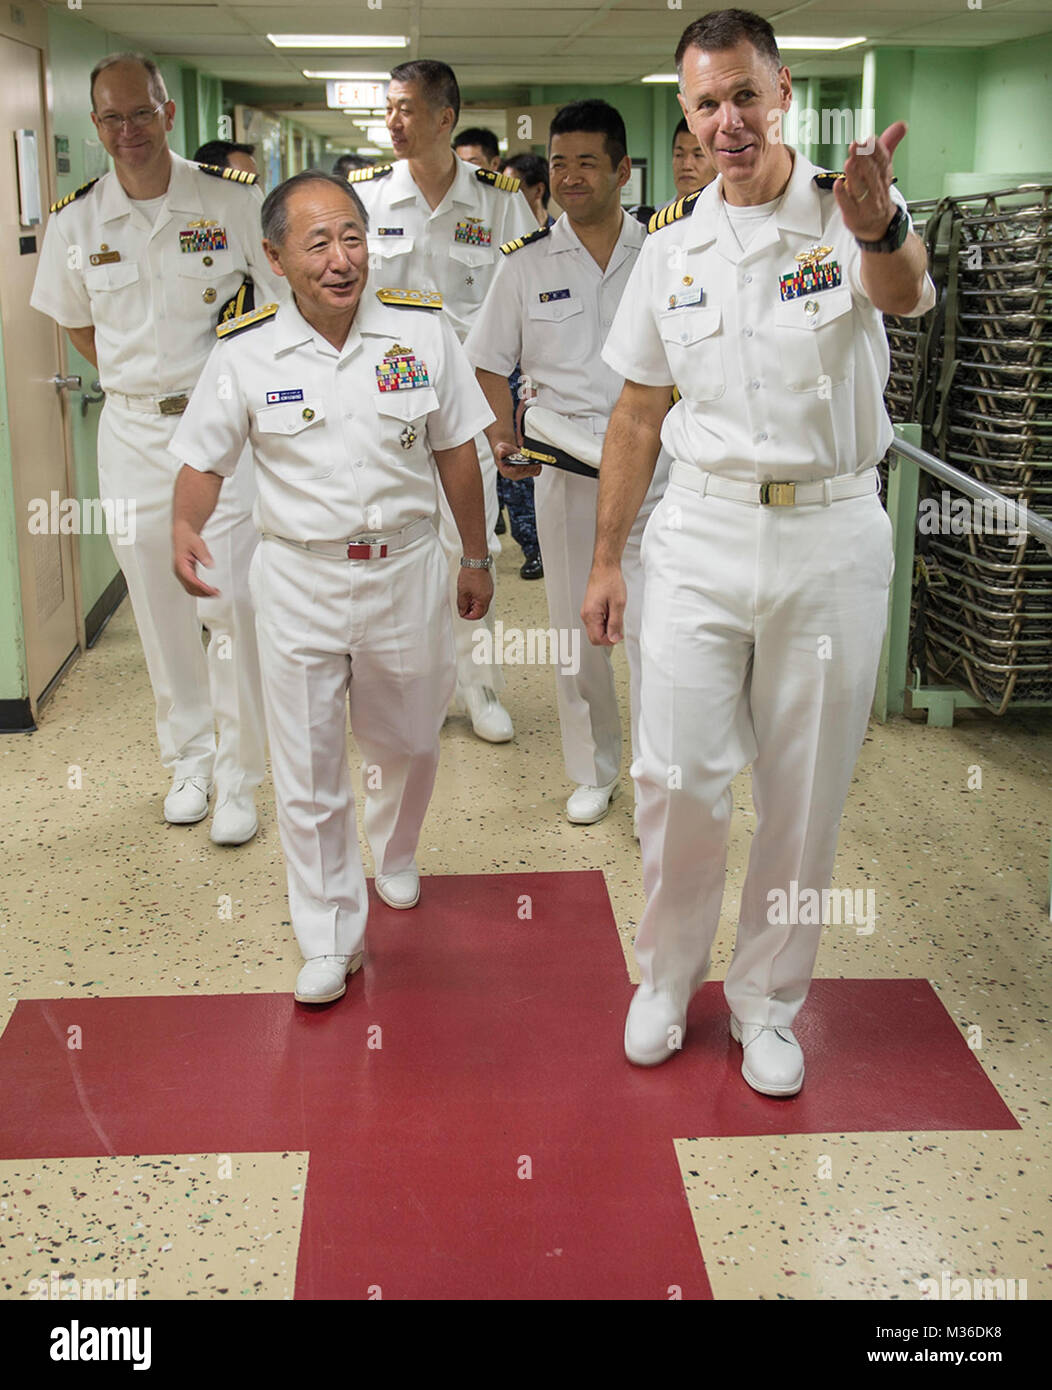 160717-N-QW941-239  DA NANG, Vietnam (July 17, 2016) U.S. Navy Capt. Peter Roberts (right), commanding officer, Medical Treatment Facility, USNS Mercy (T-AH 19), guides Admiral Katsutoshi Kawano (left), chief of staff of the Joint Staff, Japanese Self-Defense Force, during a tour of the ship. Kawano visited Mercy and JS Shimokita (LST-4002), which are both in Da Nang for Pacific Partnership 2016. Partner nations are working side-by-side with local military and non-government organizations to conduct cooperative health engagements, community relation events and subject matter expert exchanges t Stock Photo